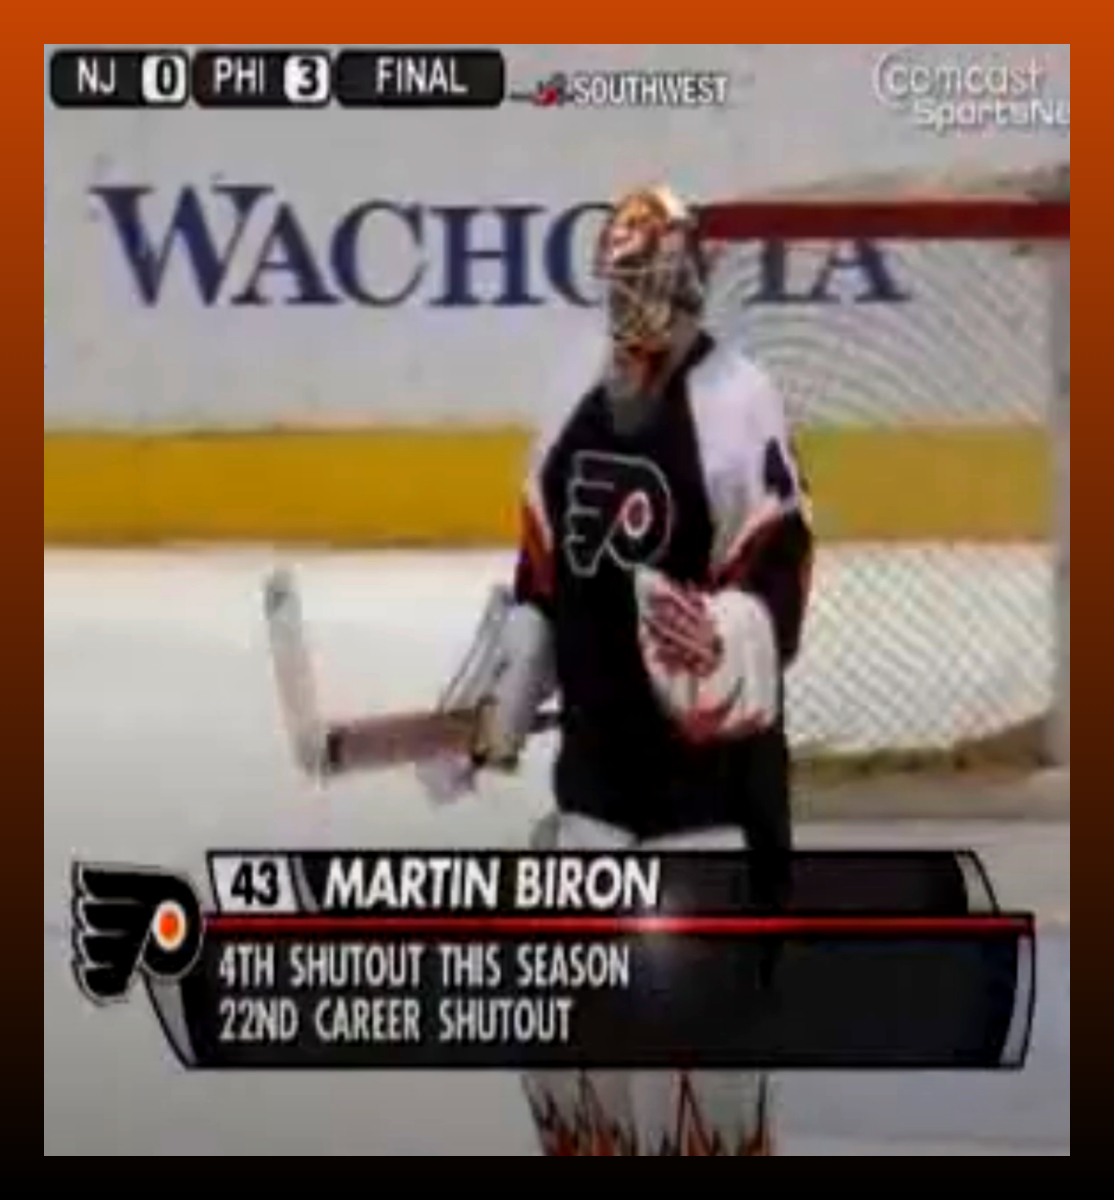 On this day in 2008, Martin Biron #ShutTheDoor!

The #PhiladelphiaFlyers were at home vs the New Jersey Devils. Biron stopped 22 shots, while goals by RJ Umberger, Scottie Upshall, and Joffrey Lupul led the Flyers to a 3-0 win.